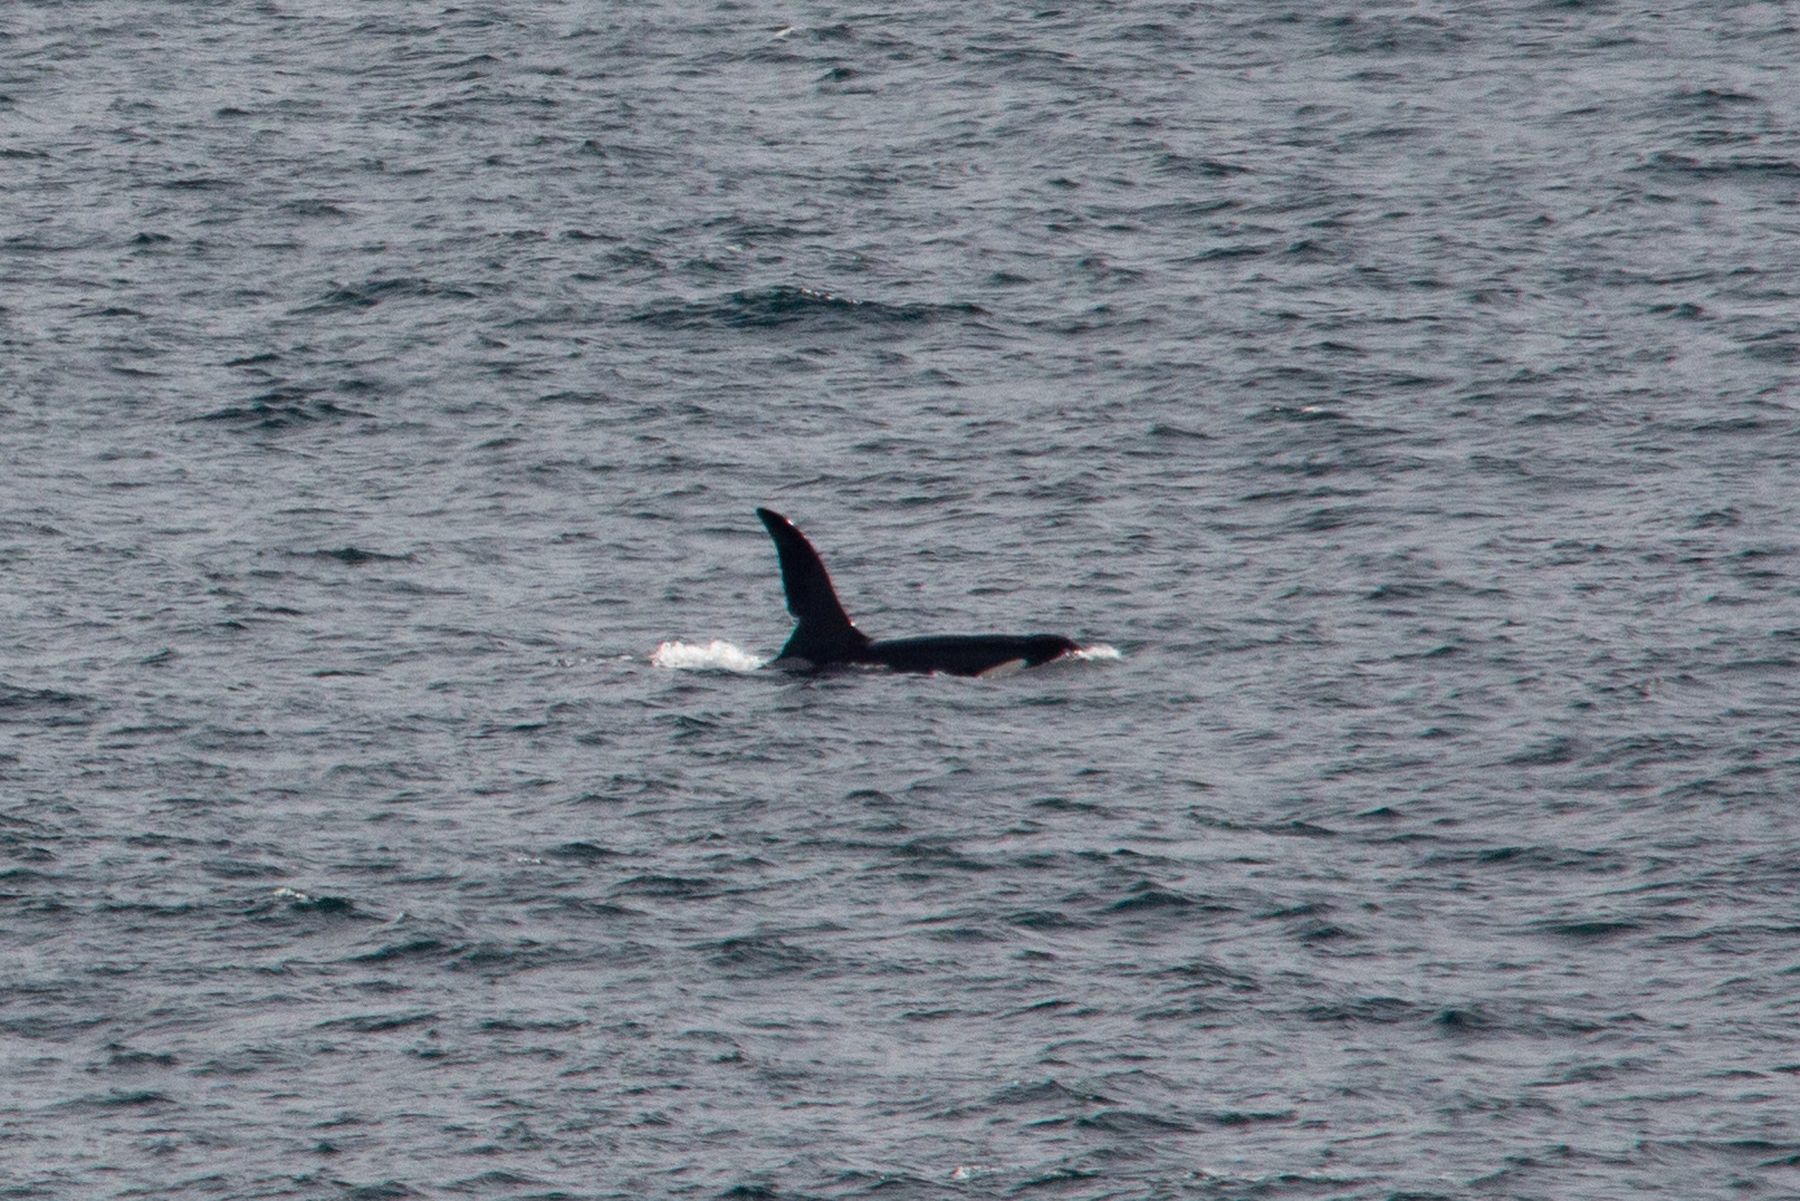 John Coe is one of two killer whales photographed off the west coast of Cornwall. Picture: Will McEnery/PA